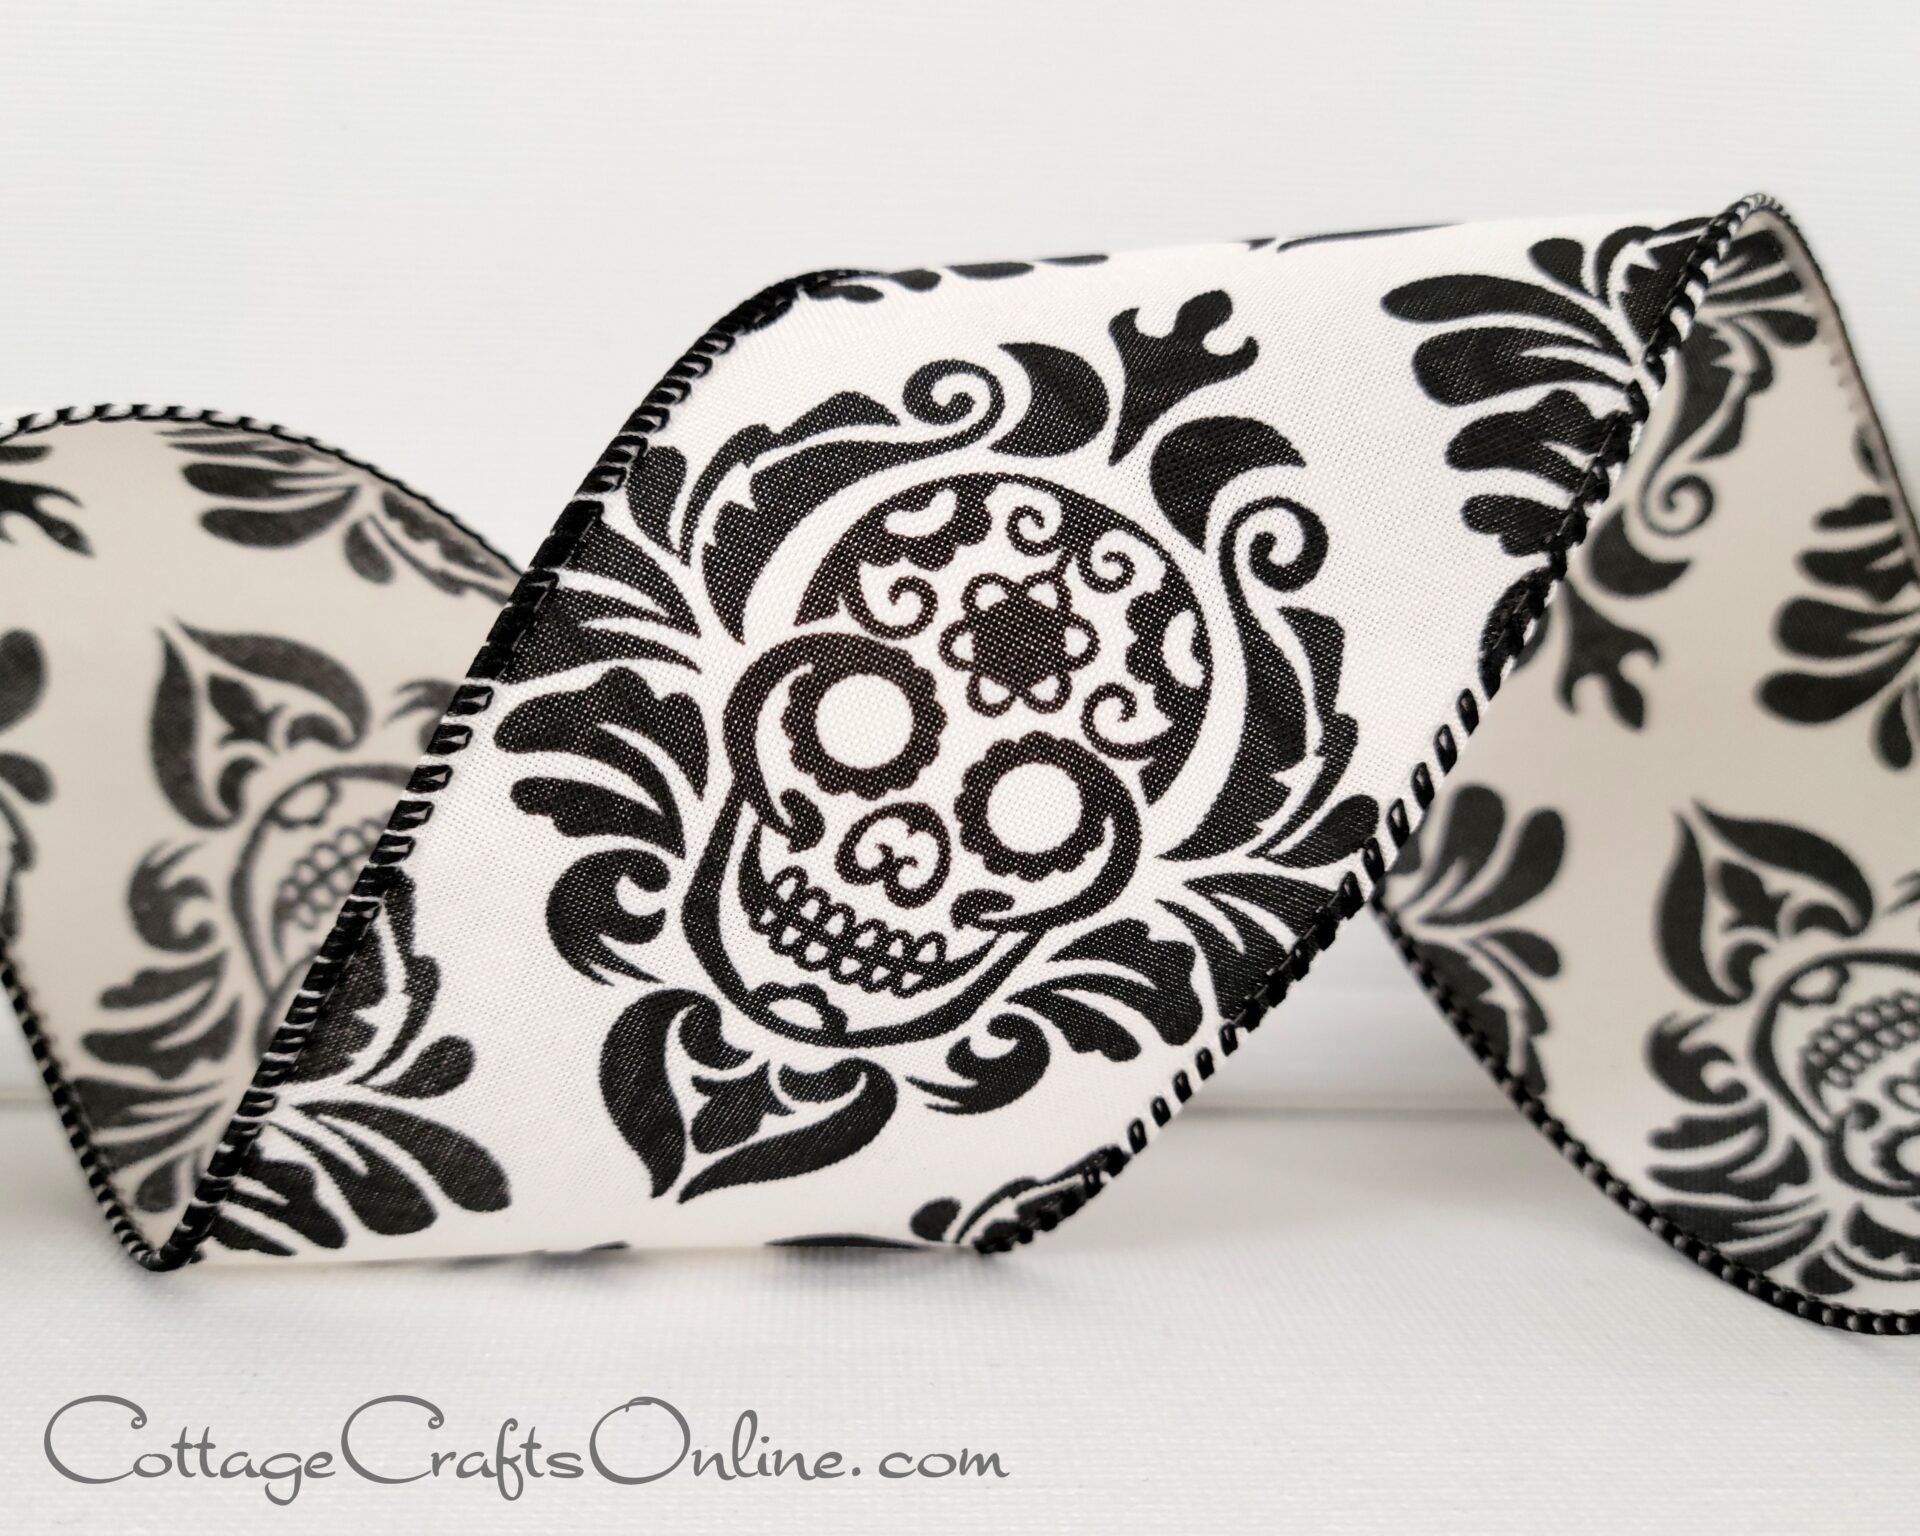 A black and white skull ribbon sitting on top of a table.